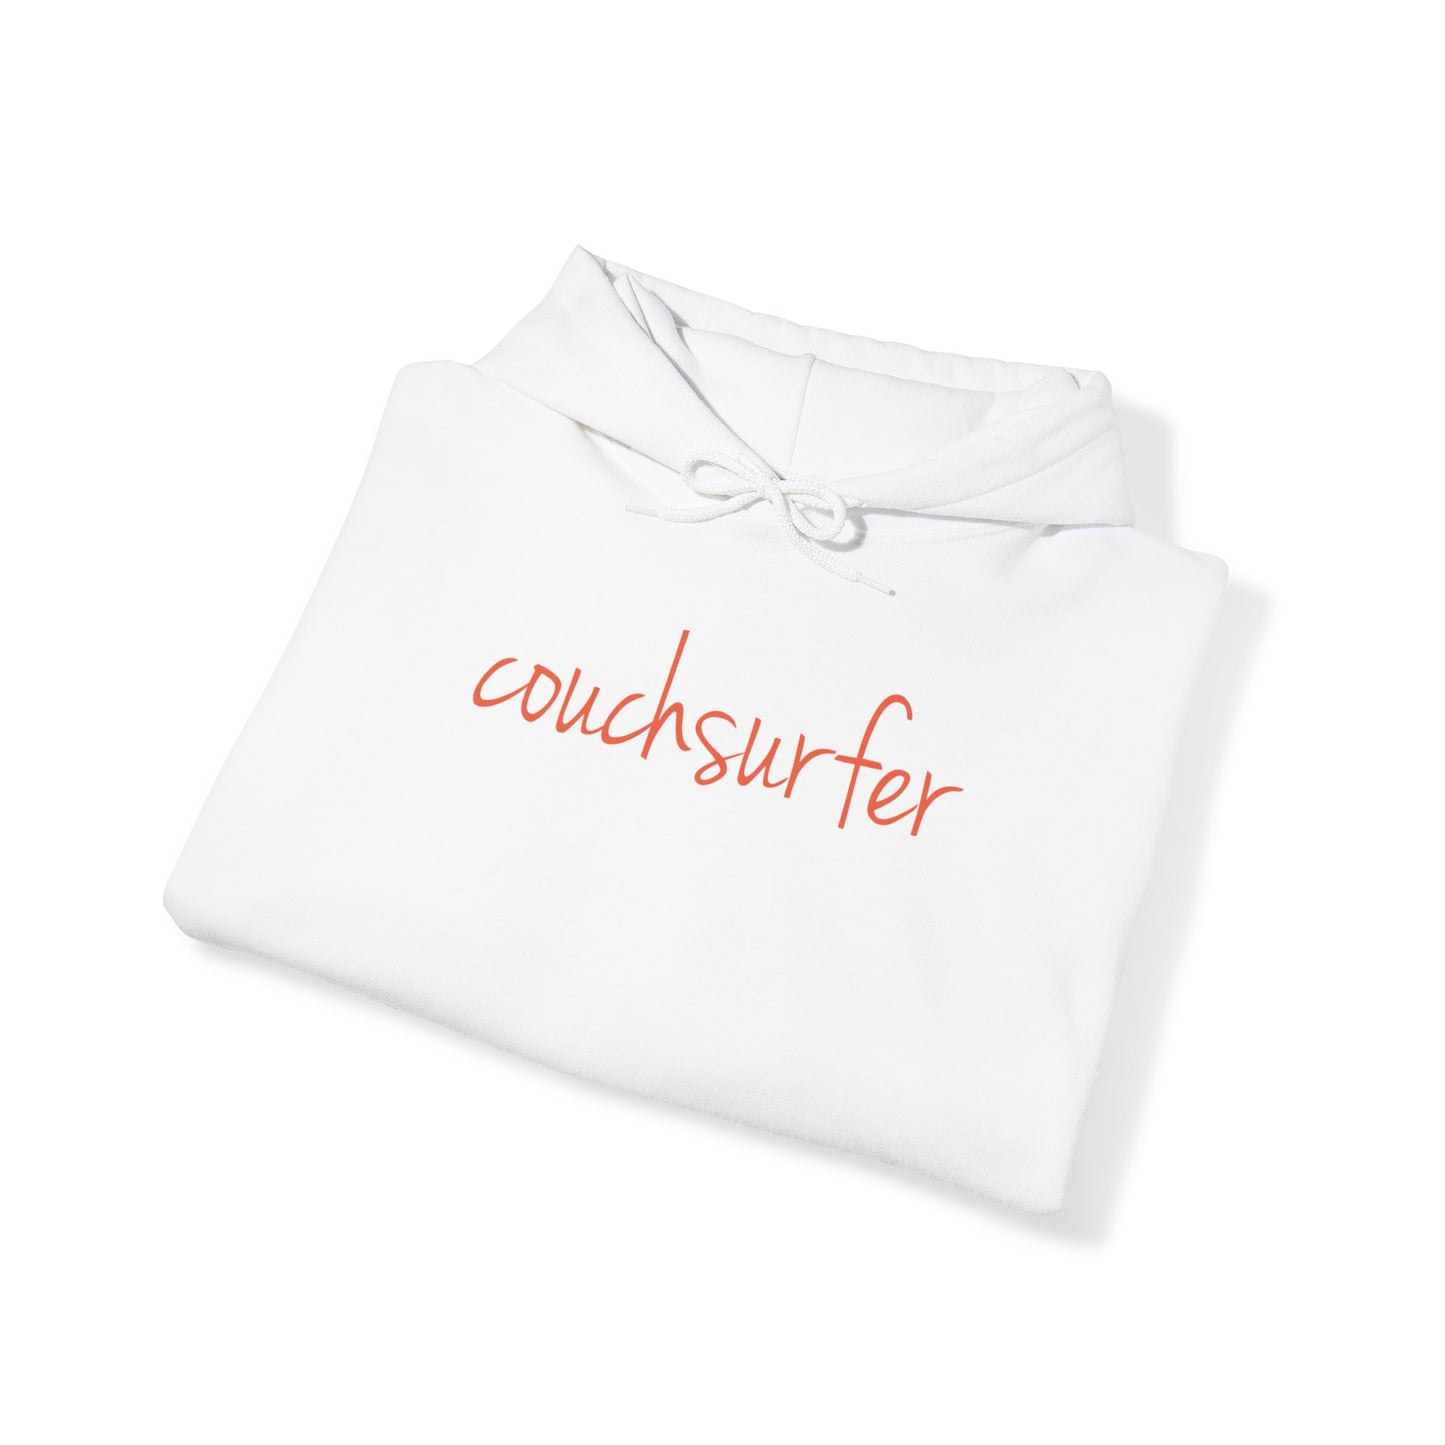 The Couchsurfer Hoodie